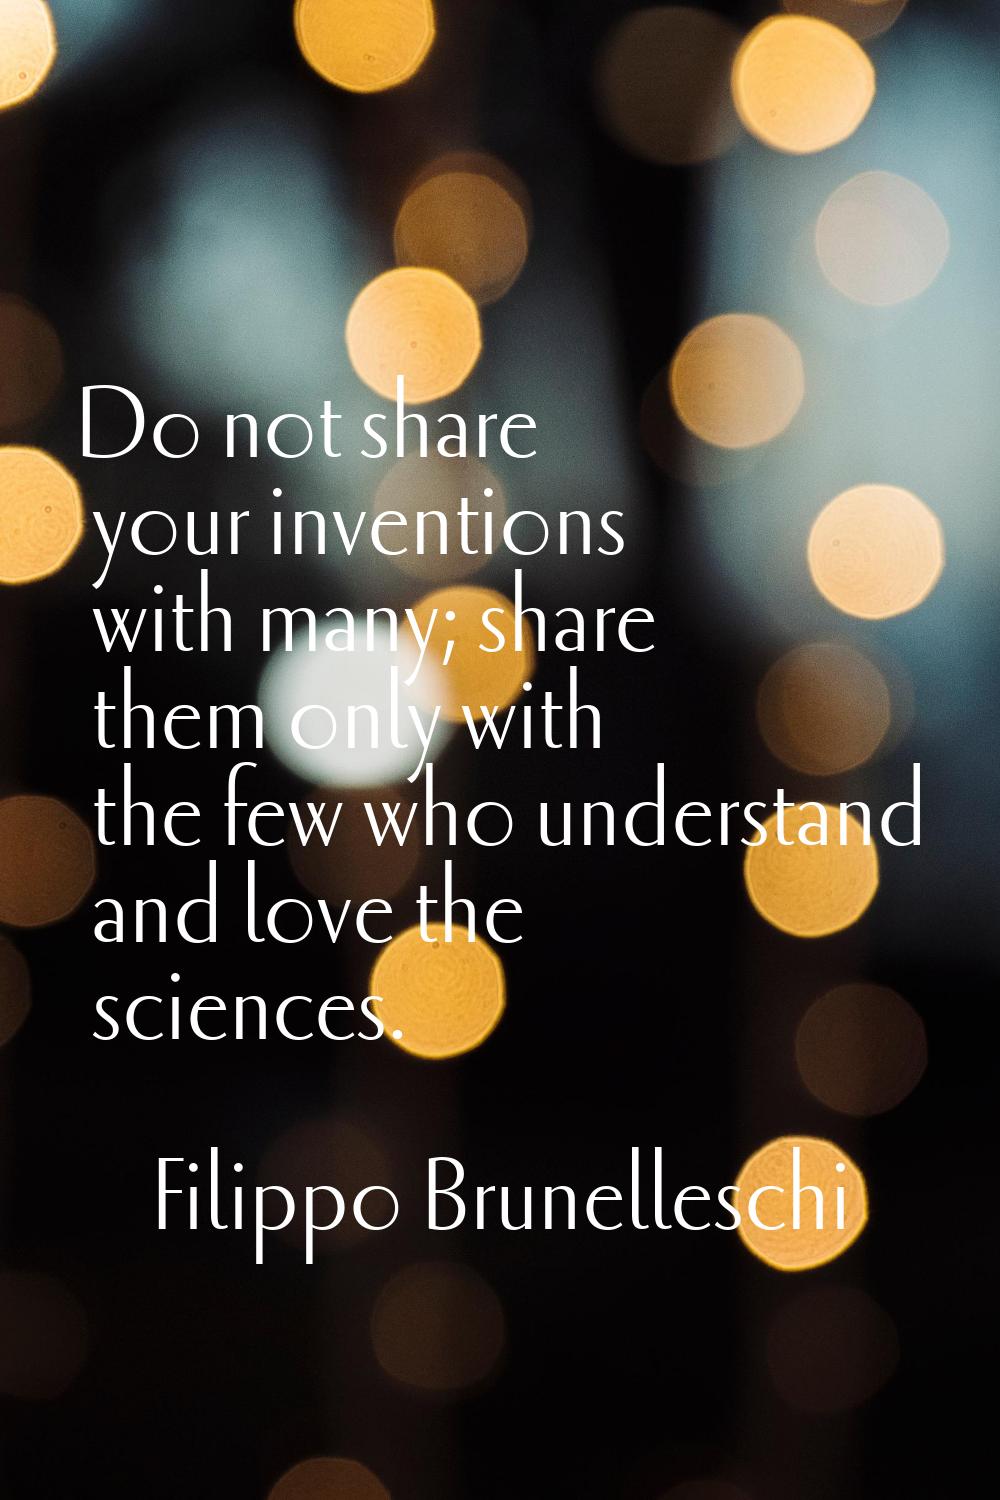 Do not share your inventions with many; share them only with the few who understand and love the sc